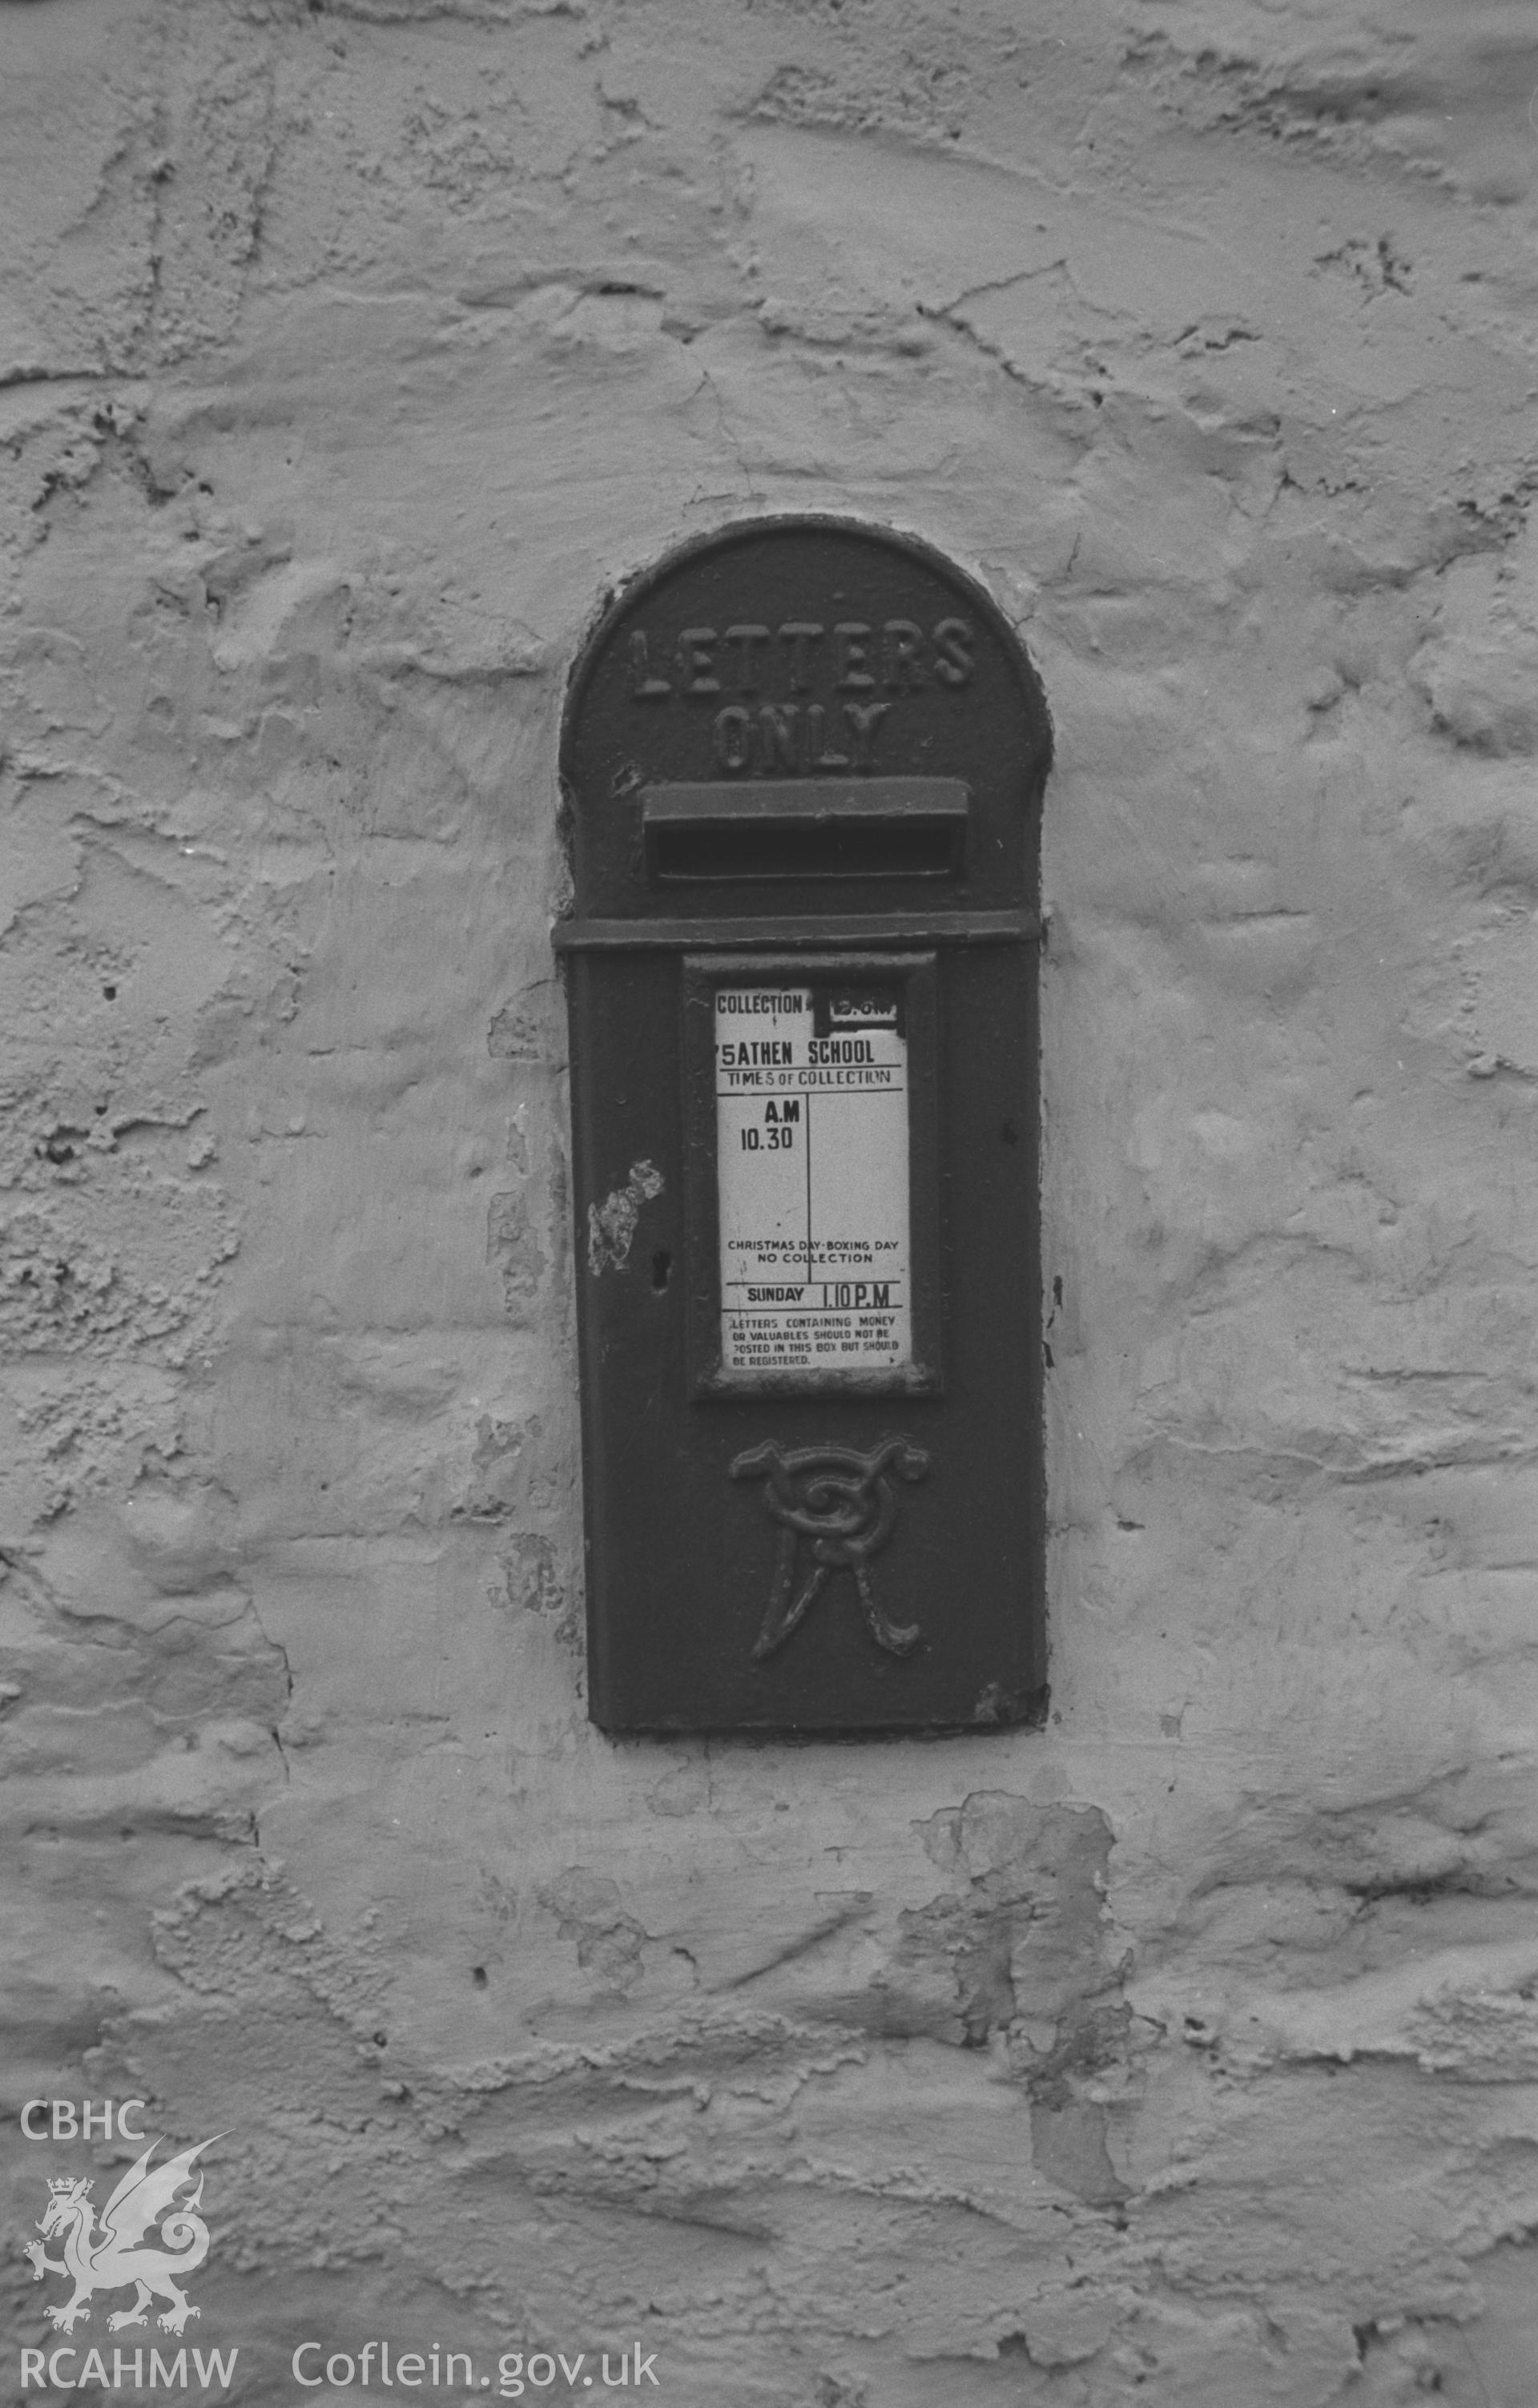 Digital copy of a black and white negative showing wall letterbox on Athen School, Gartheli, north of Lampeter. Photographed by Arthur O. Chater on 20th January 1968, from Grid Reference SN 584 565.